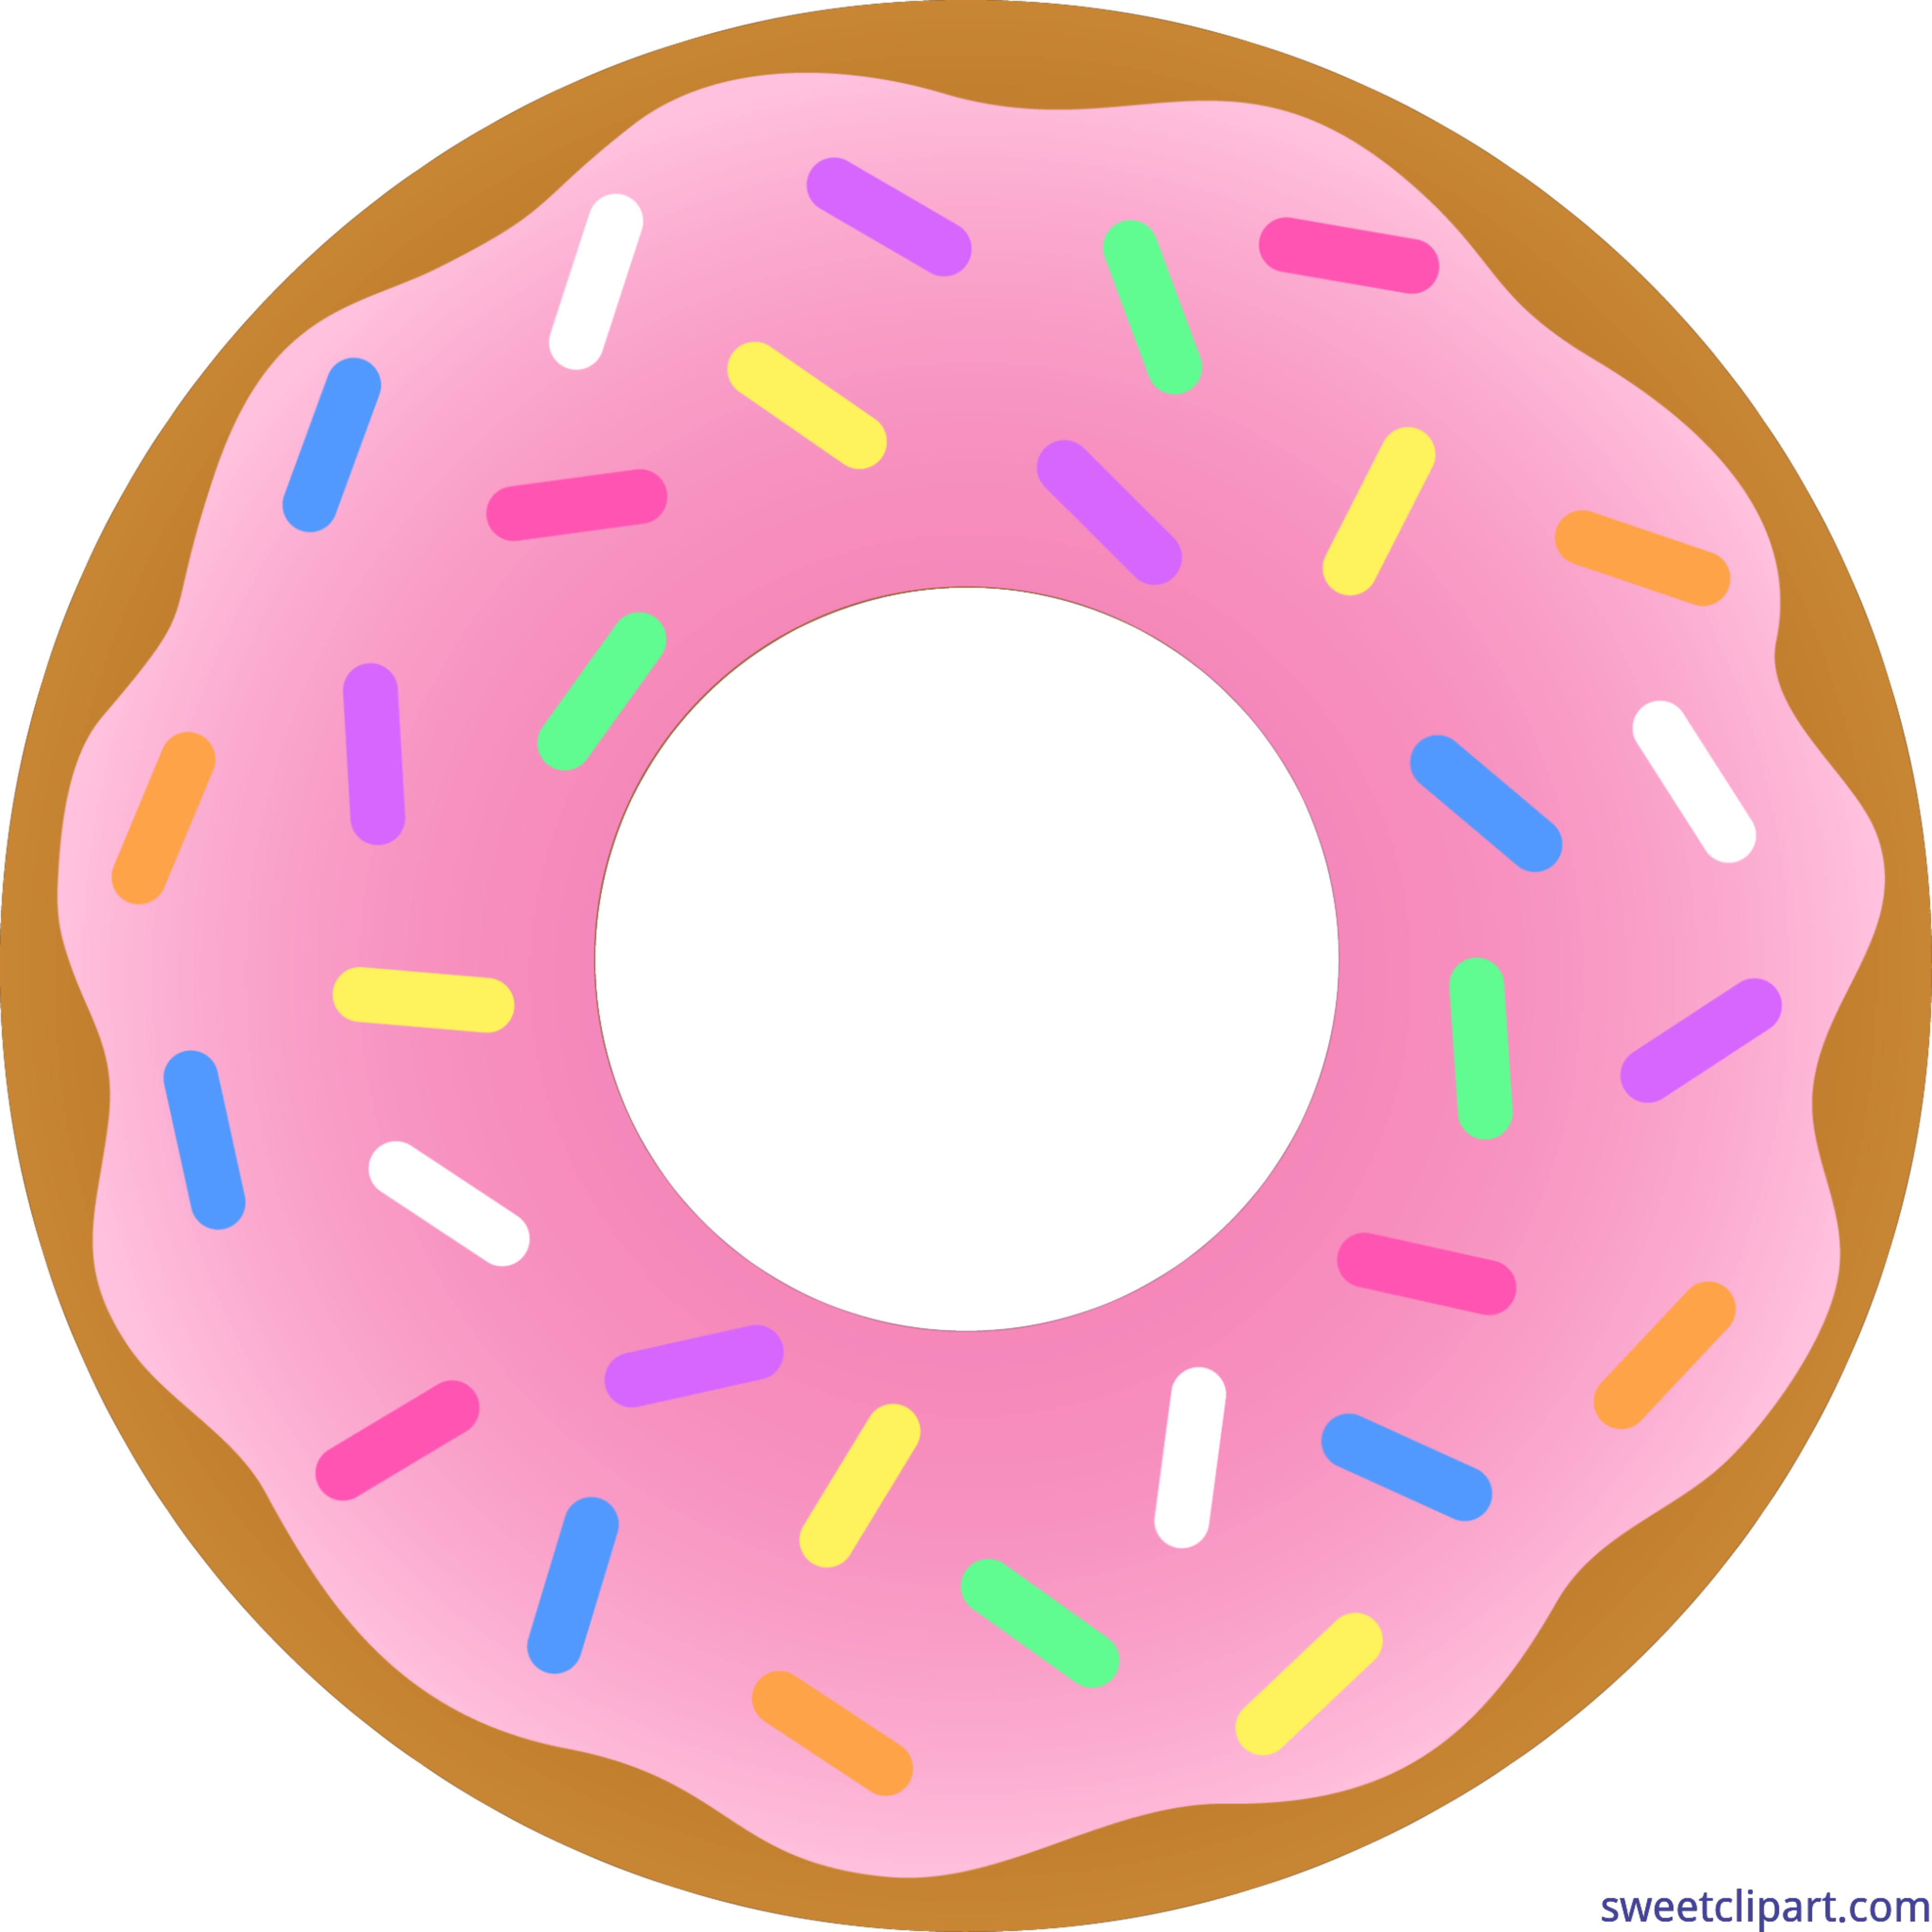 Wheel clipart pink. Donut strawberry sprinkles clip